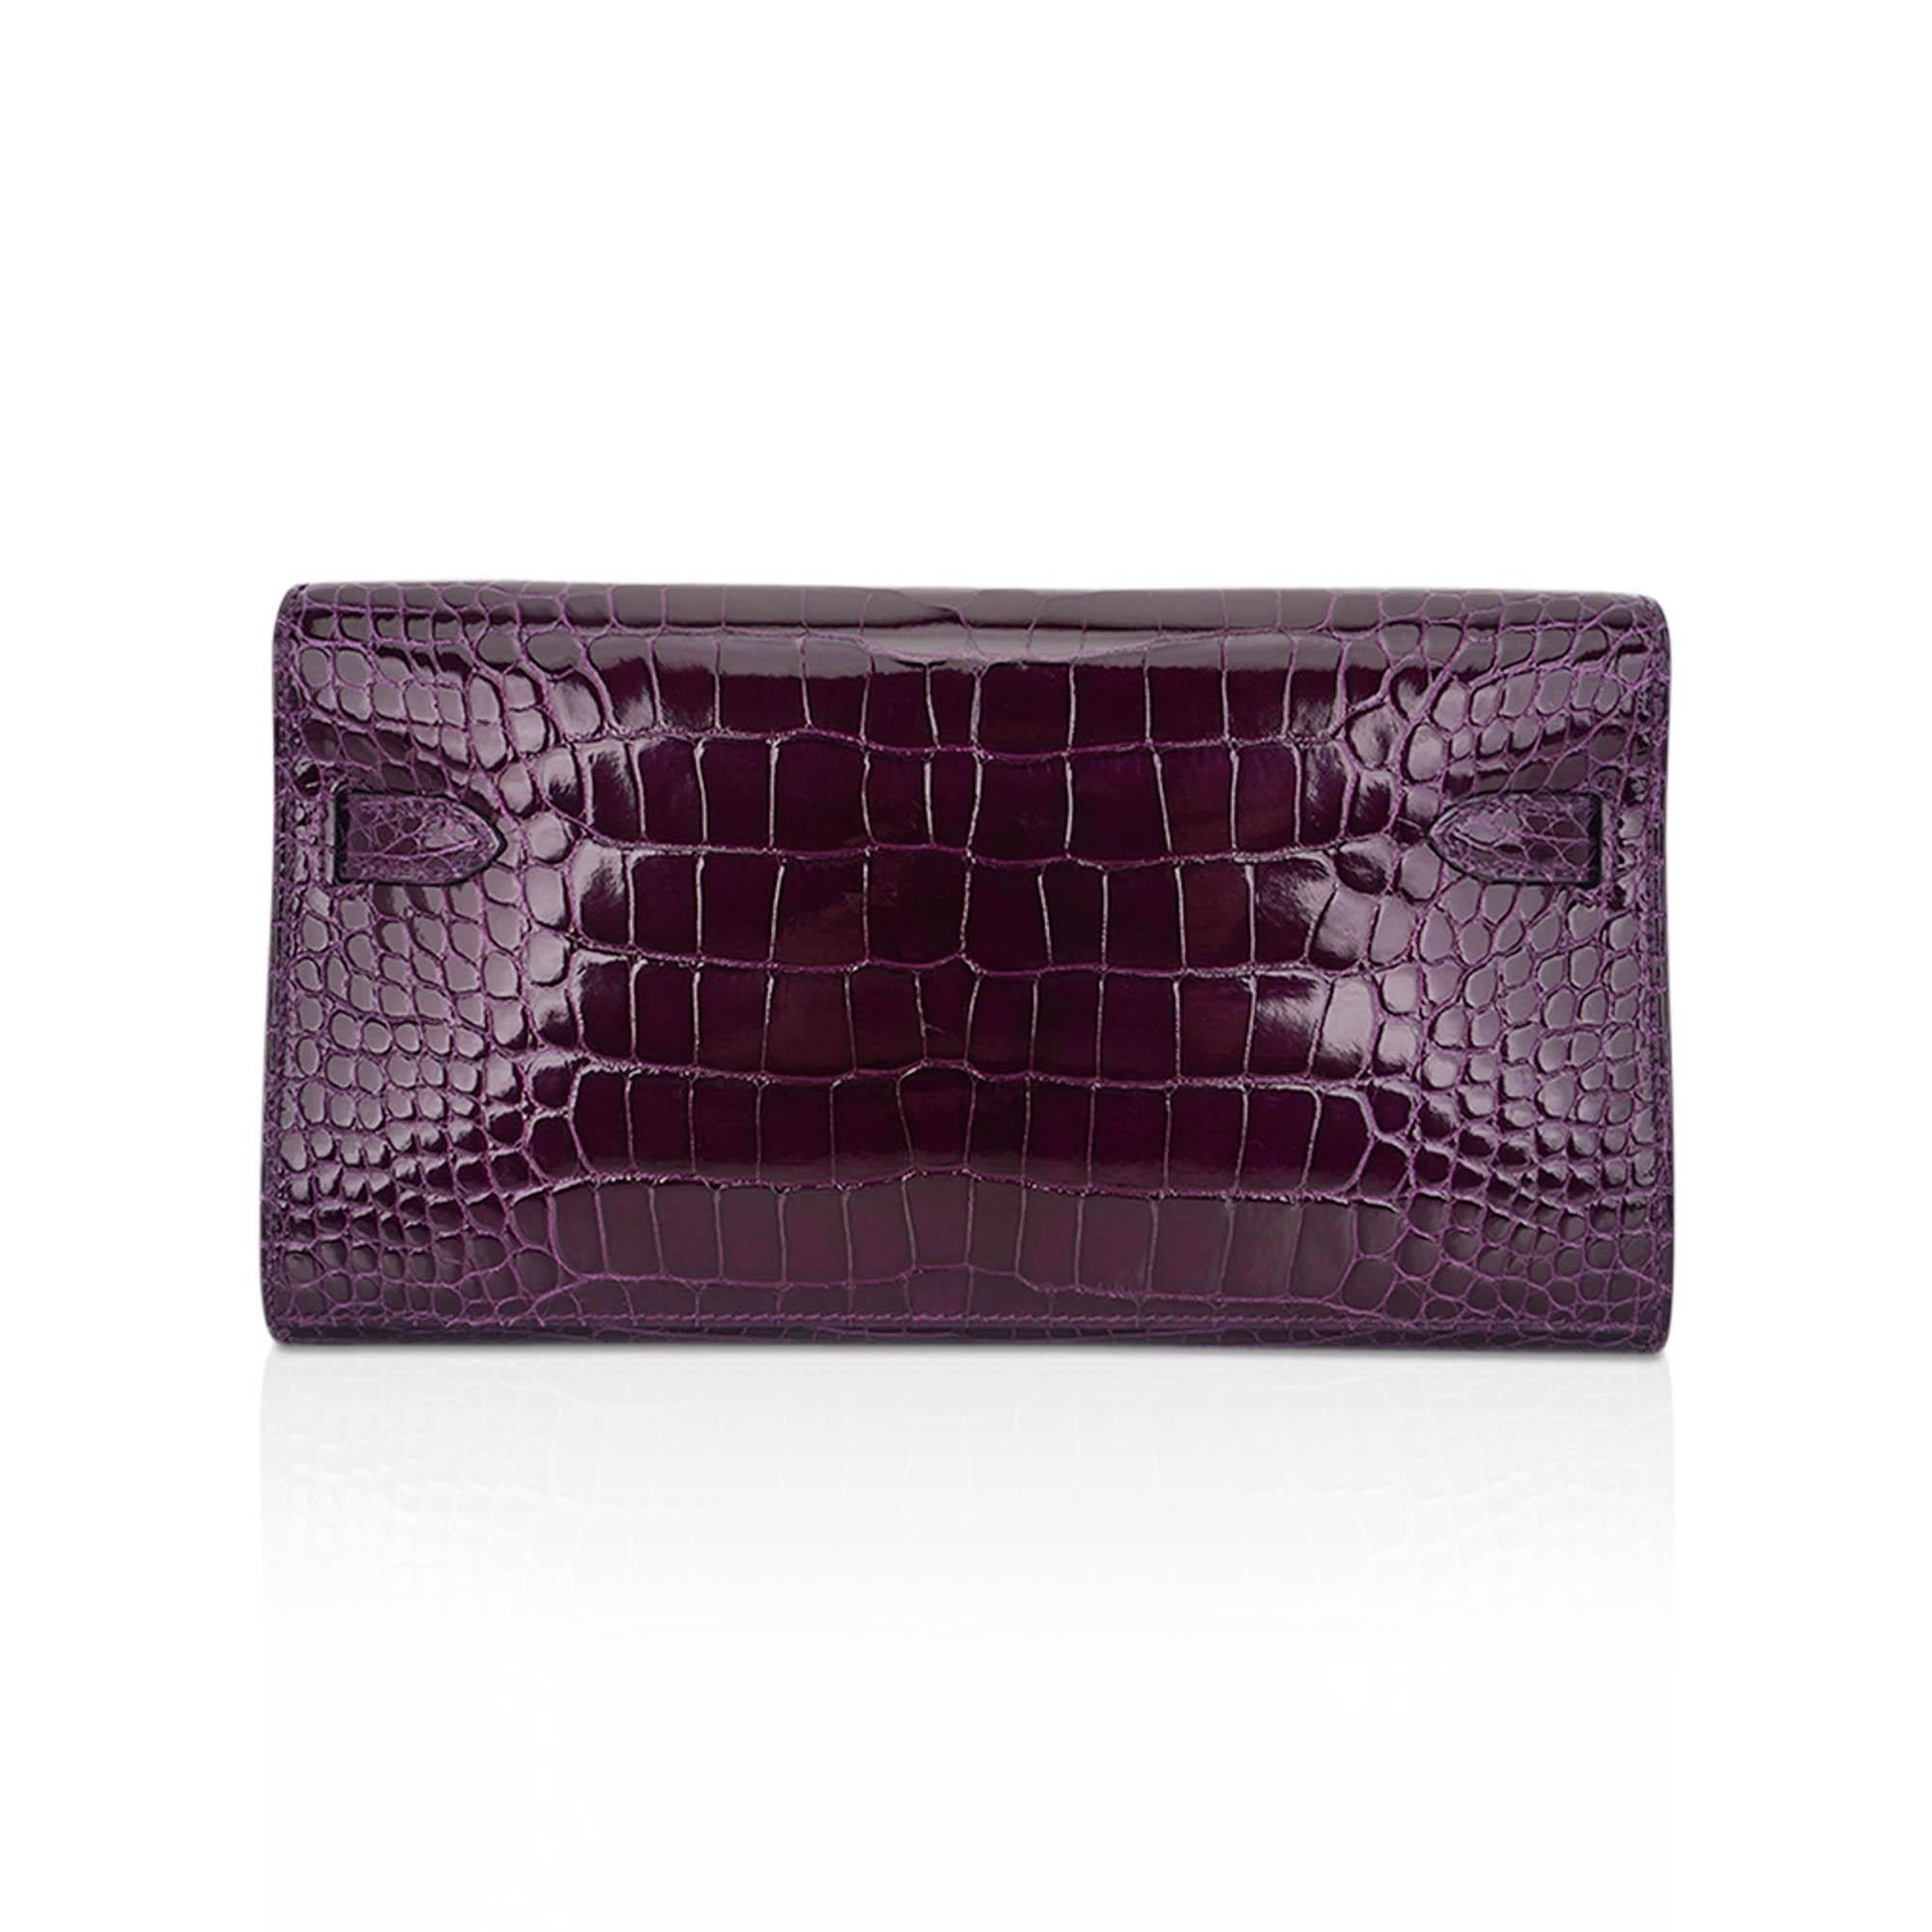 Women's Kelly Classique To Go Wallet Cassis Alligator Gold Hardware For Sale